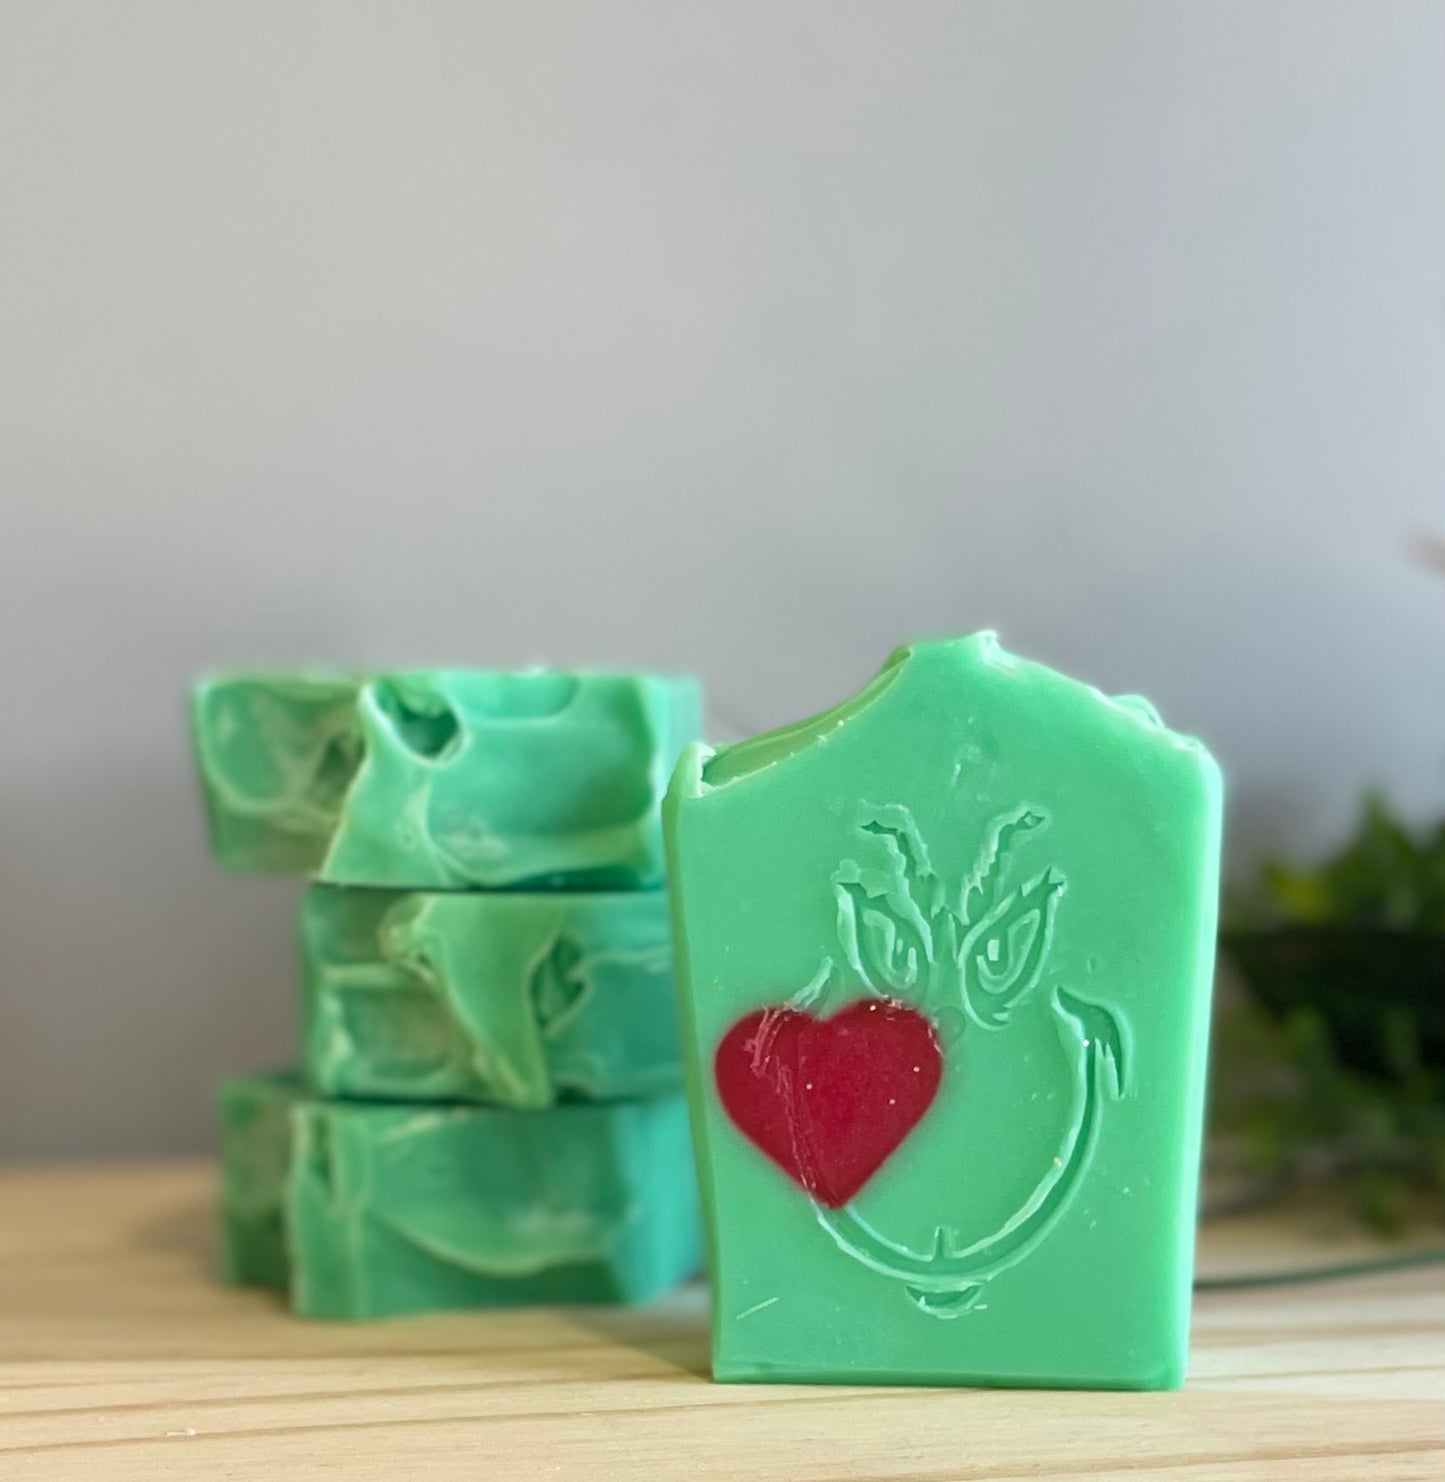 “You’re a Mean One” Artisan Soap